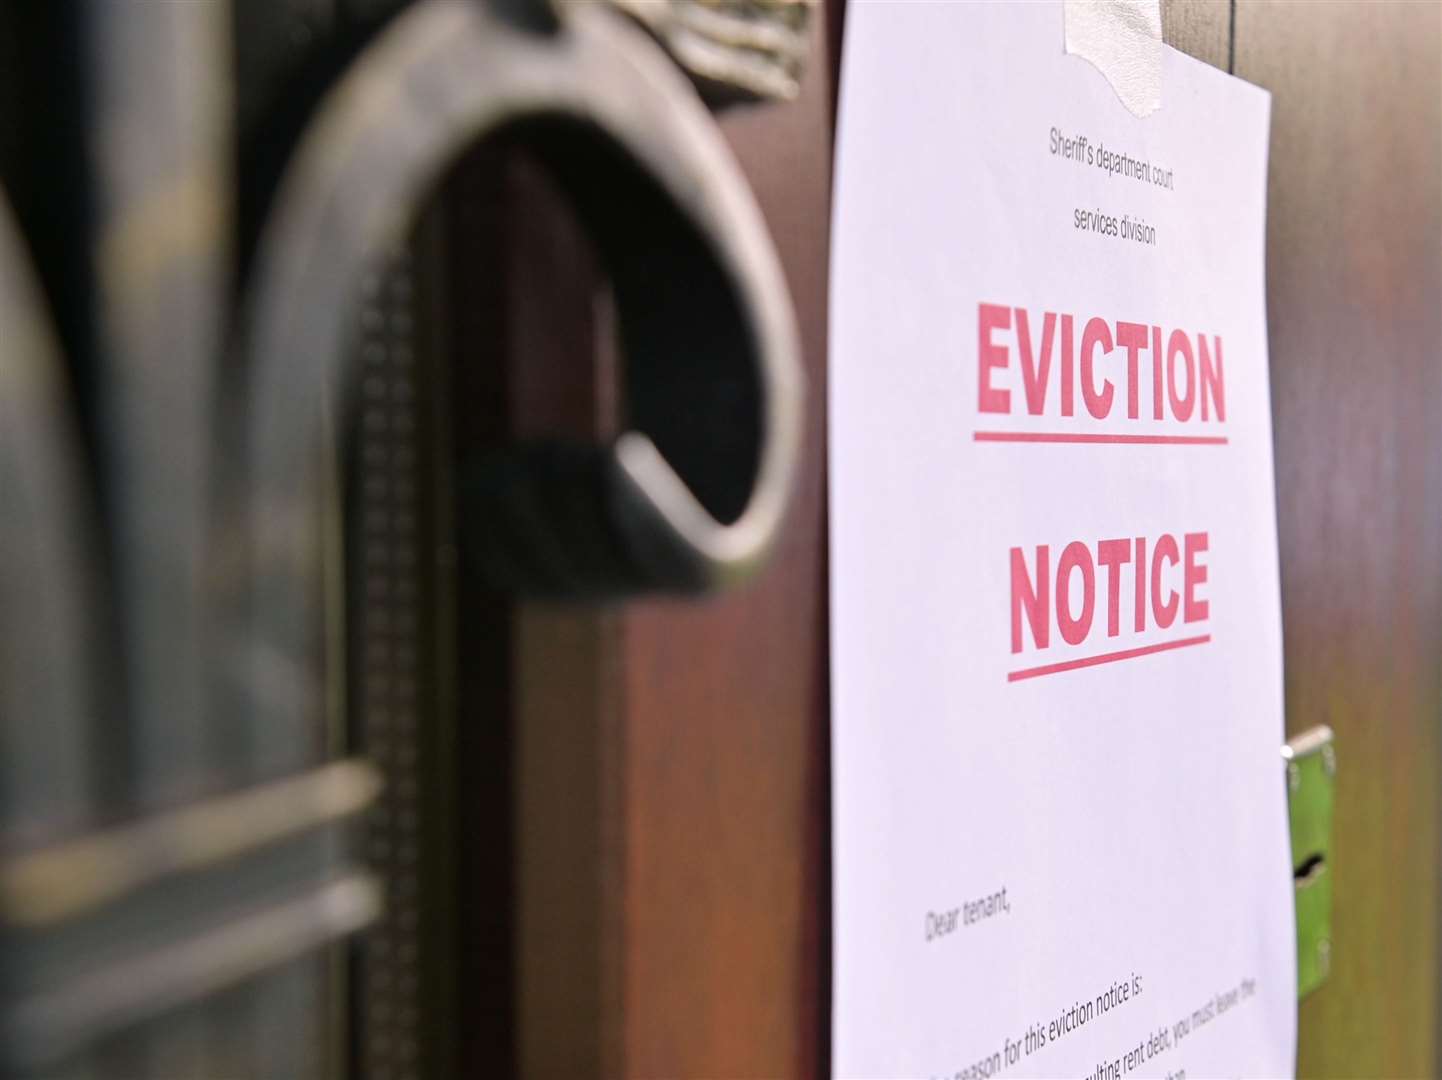 The mum is facing a ‘no fault eviction’ which could leave her homeless. Picture: iStock